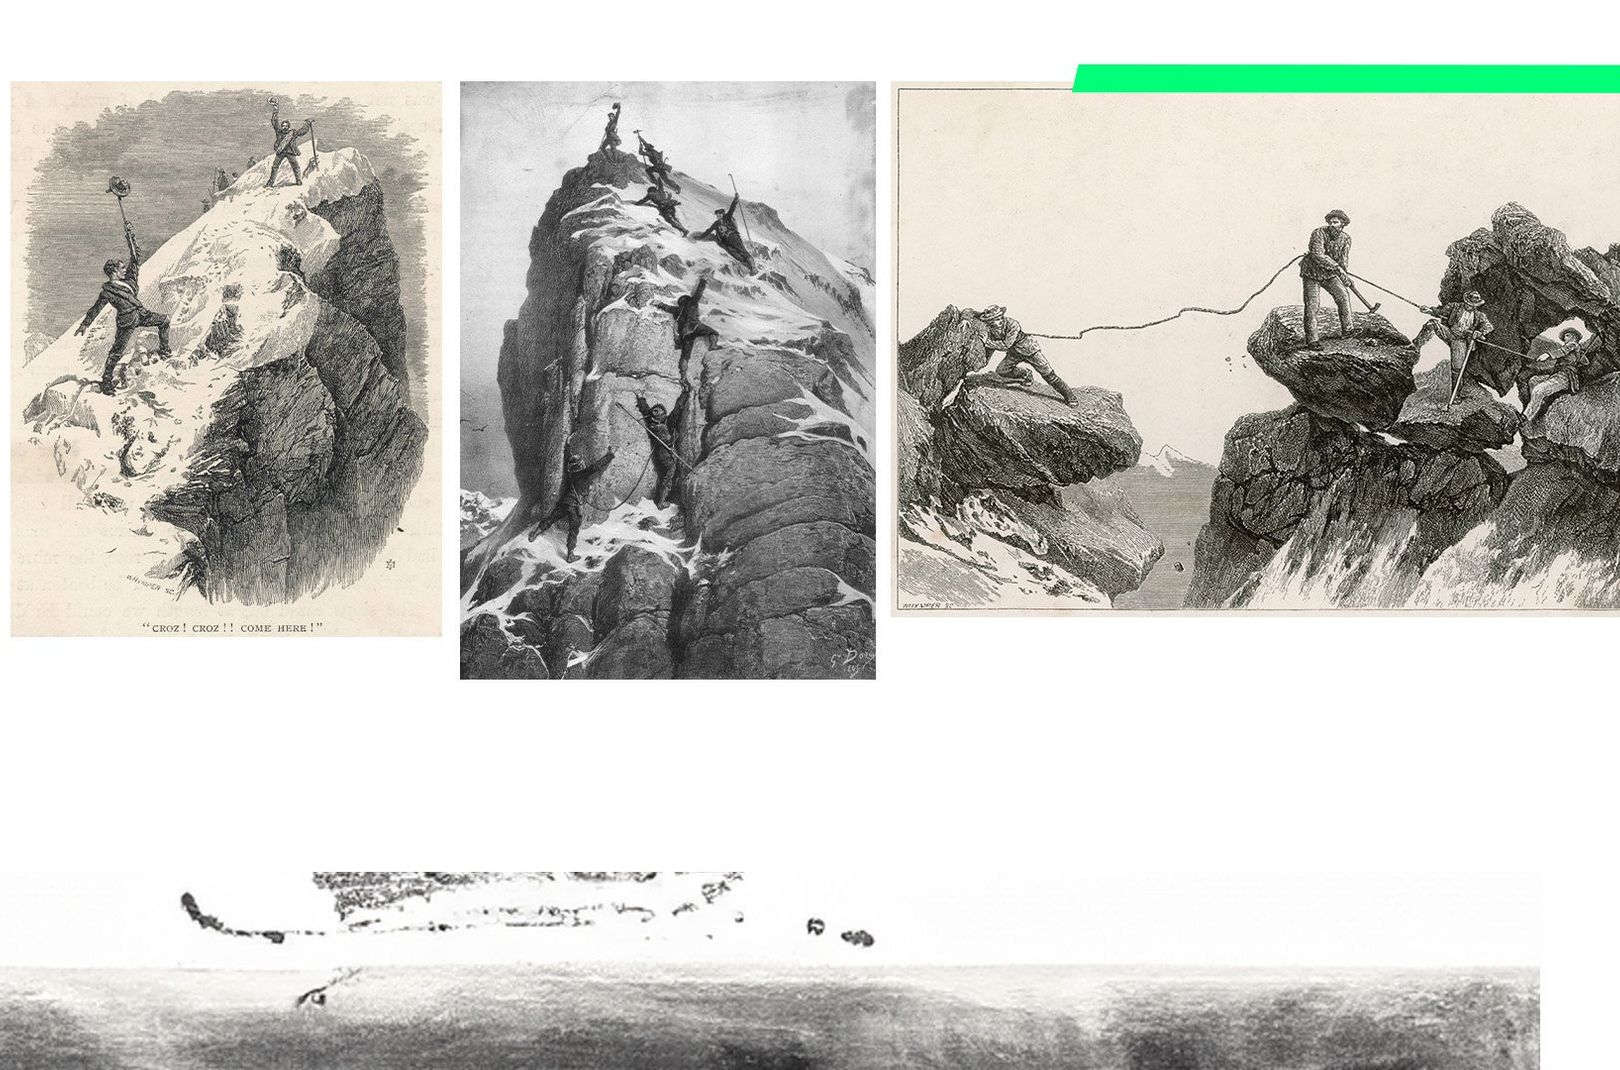 old scrapbook images of the first ascent of the matterhorn mountain in the Alps